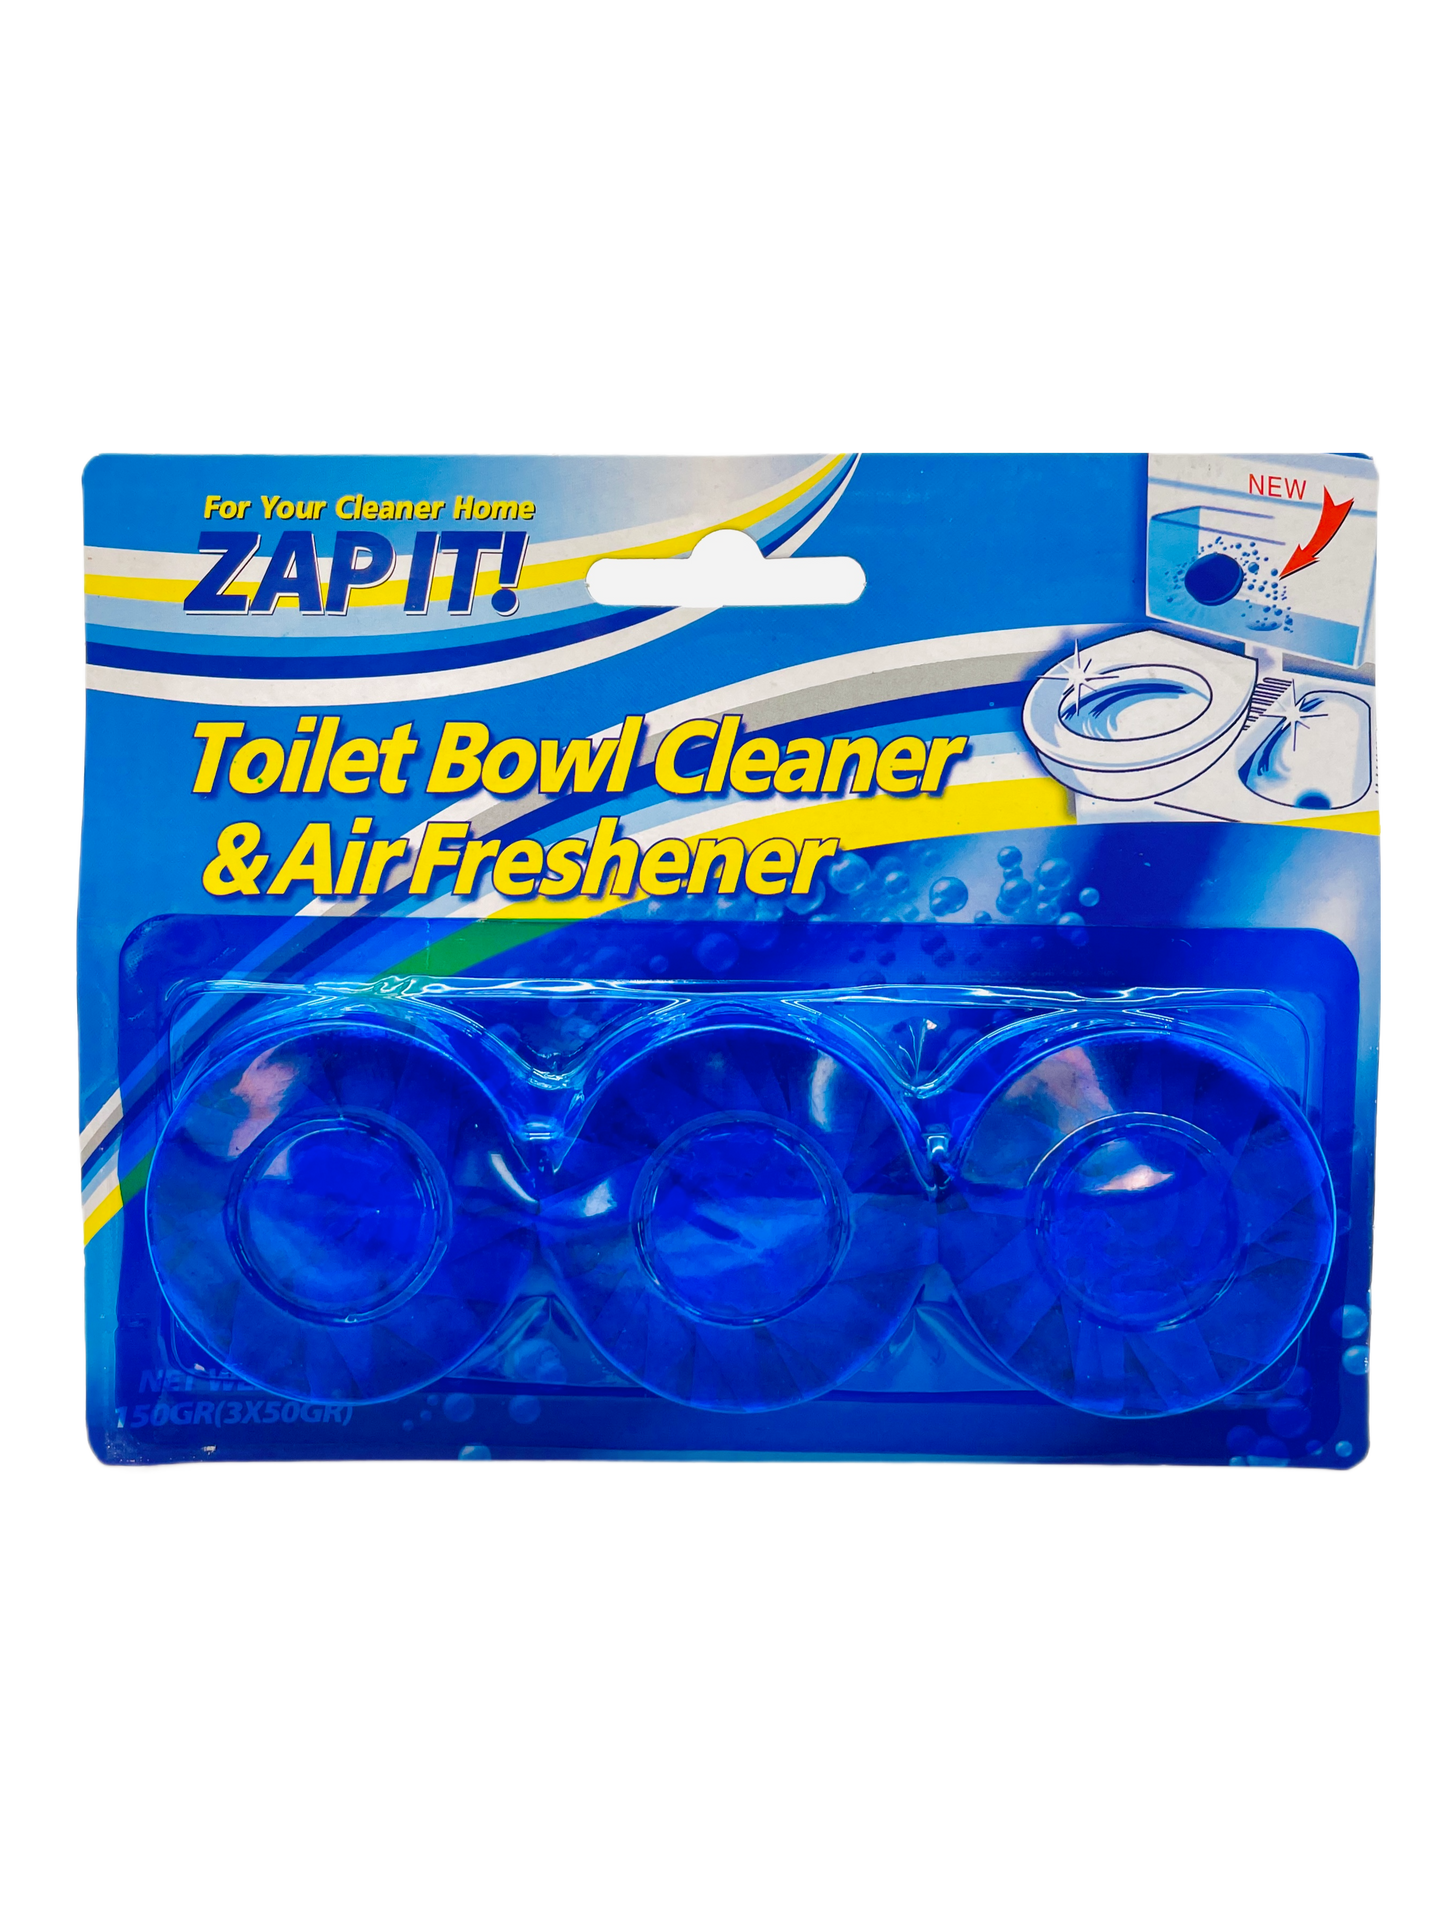 Zap it! Toilet Bowl Cleaner 3 Pack